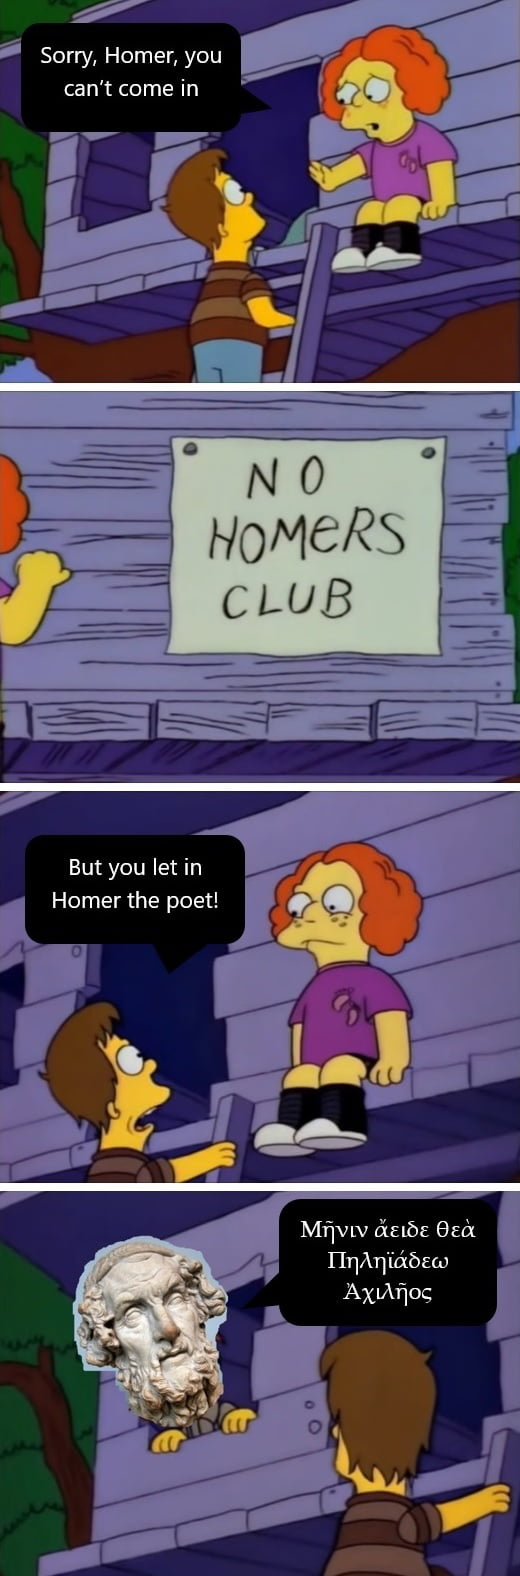 It says no HomerS